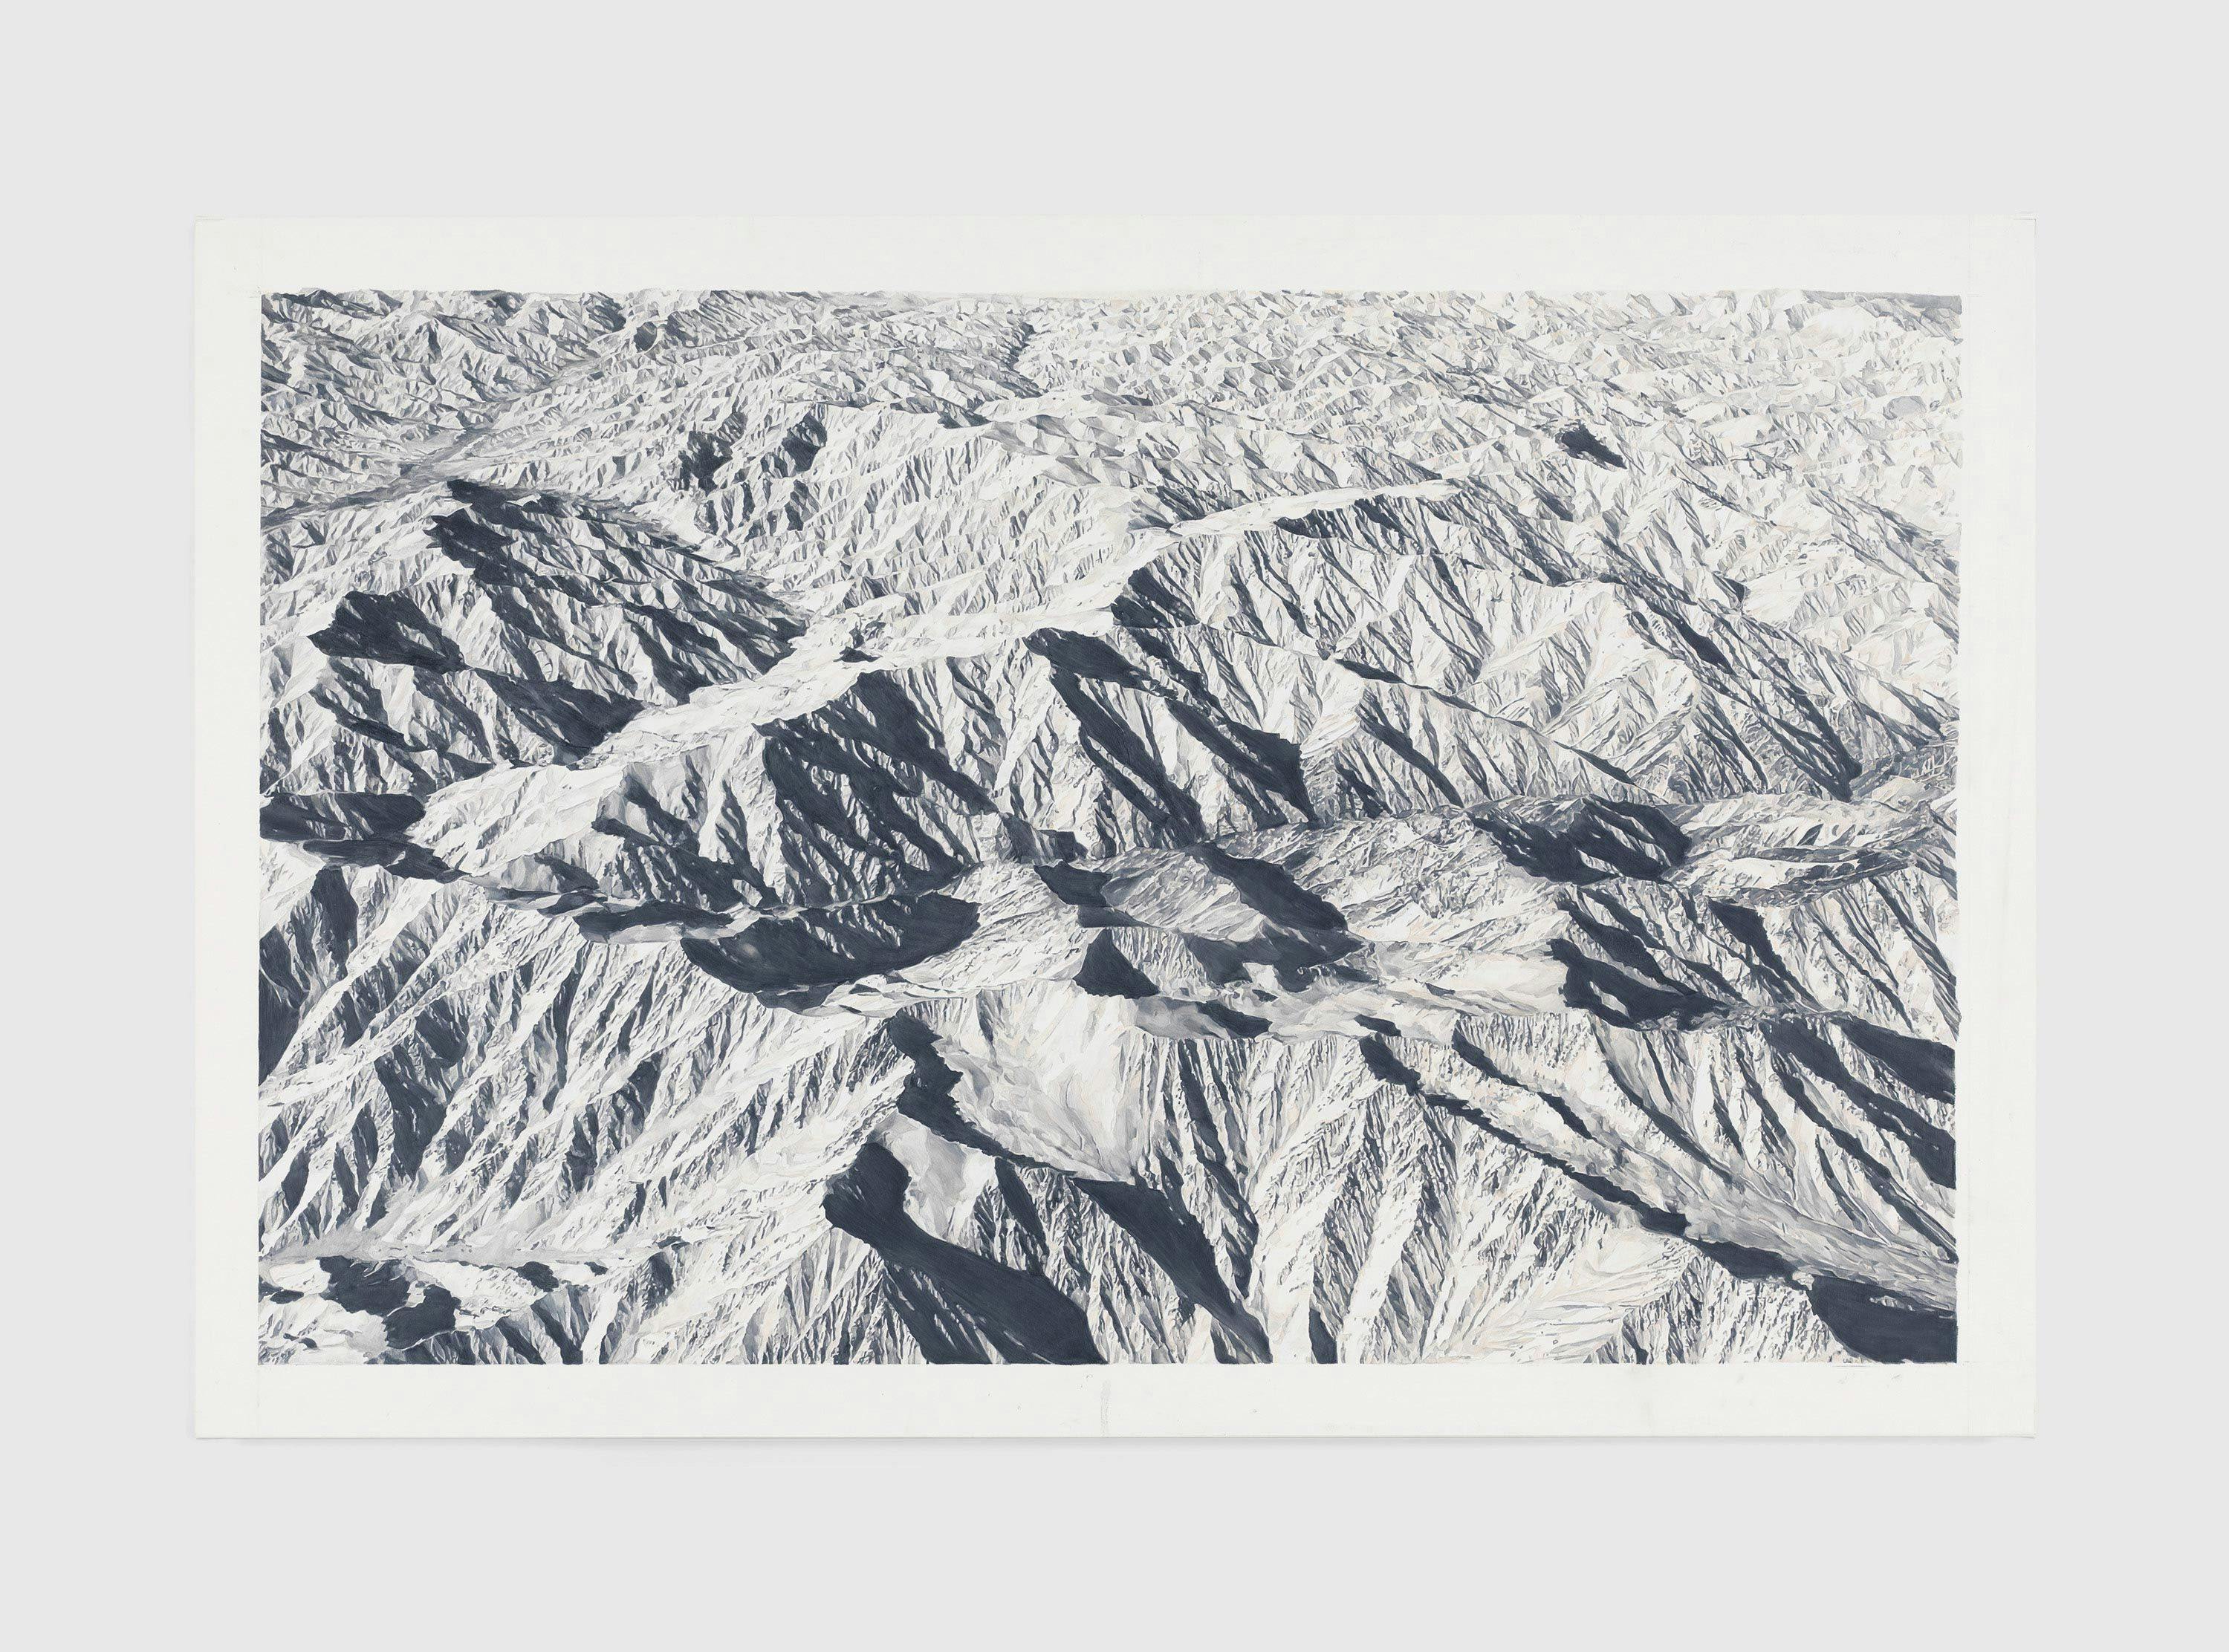 A painting by Toba Khedoori, titled Untitled (mountains 1), dated 2010 to 2011.